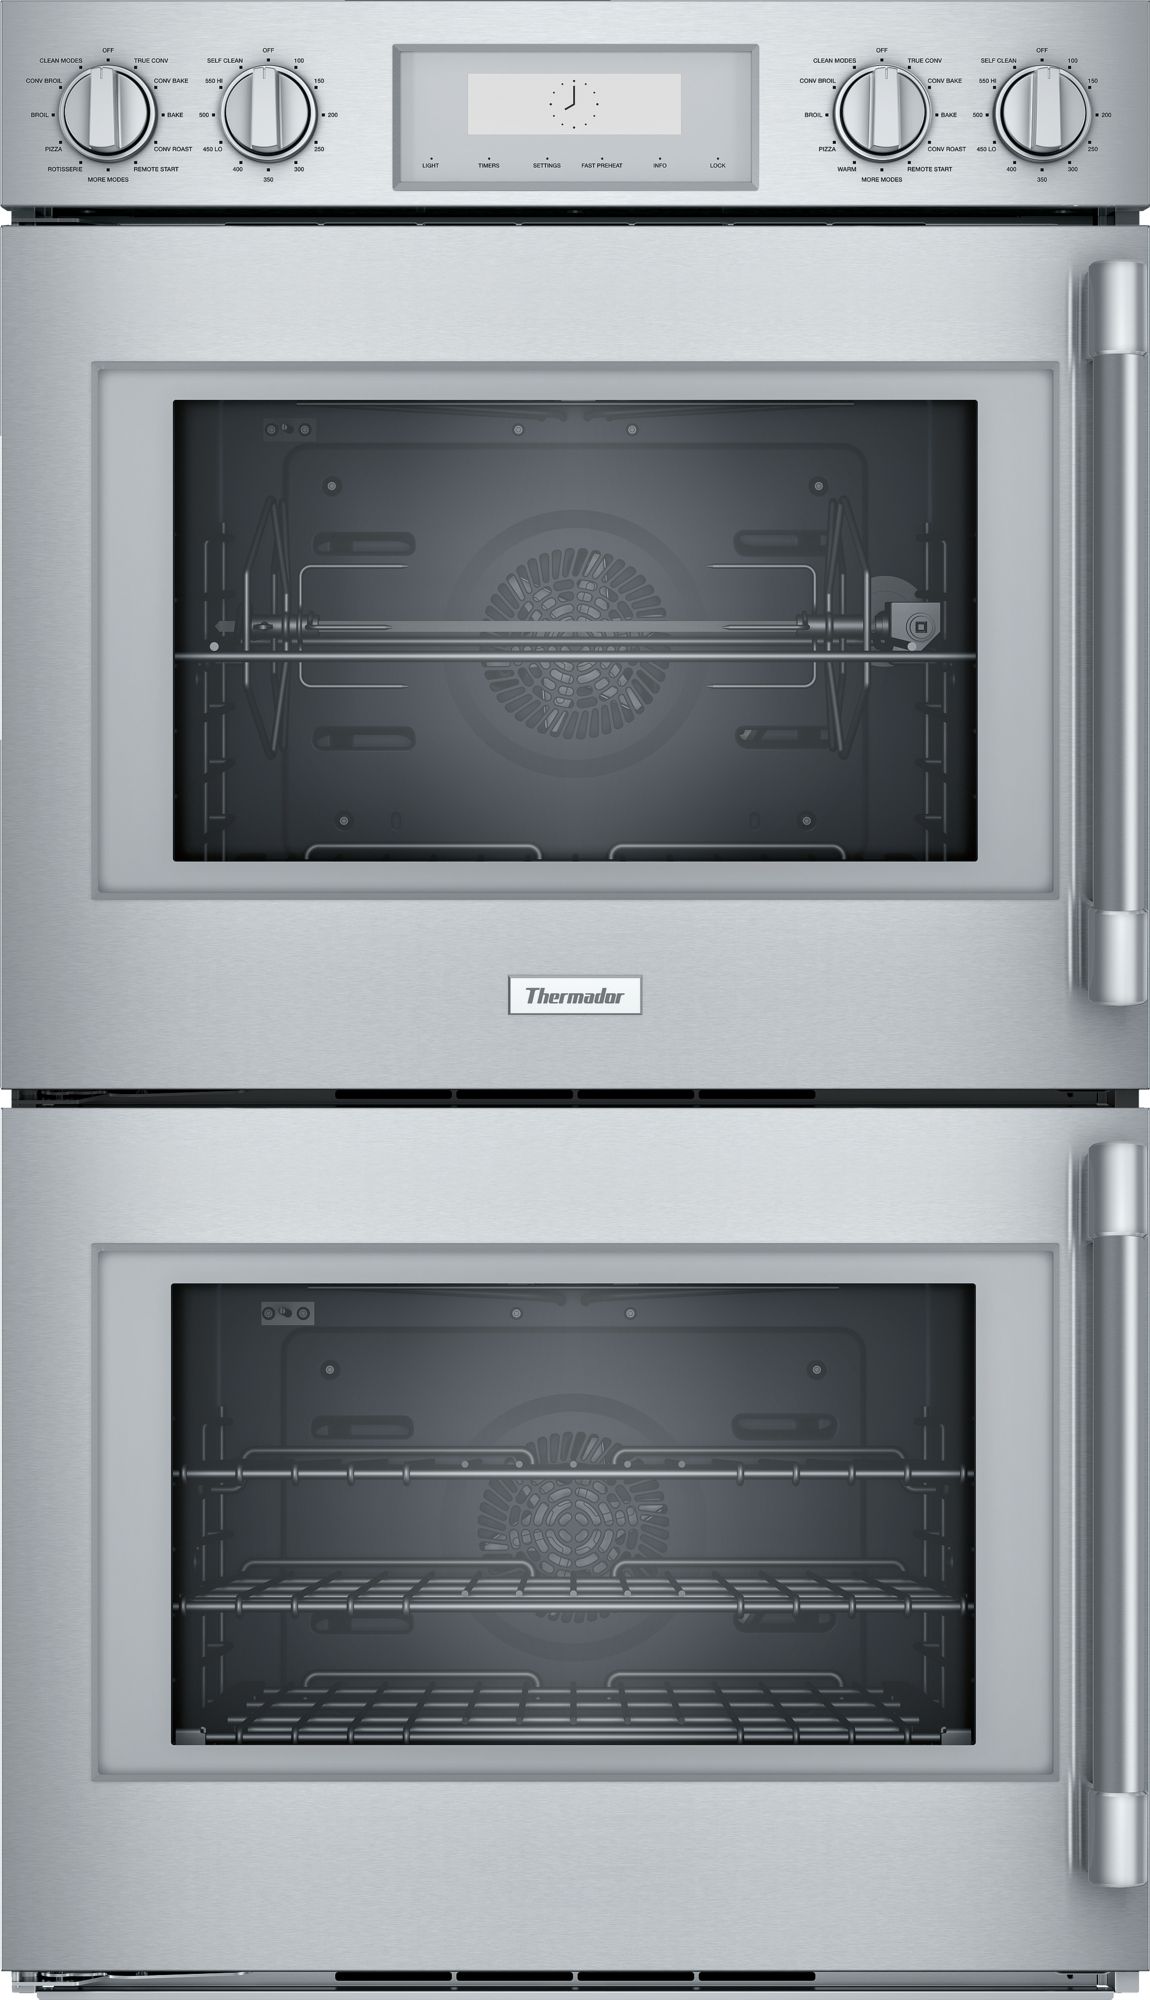 Thermador double oven